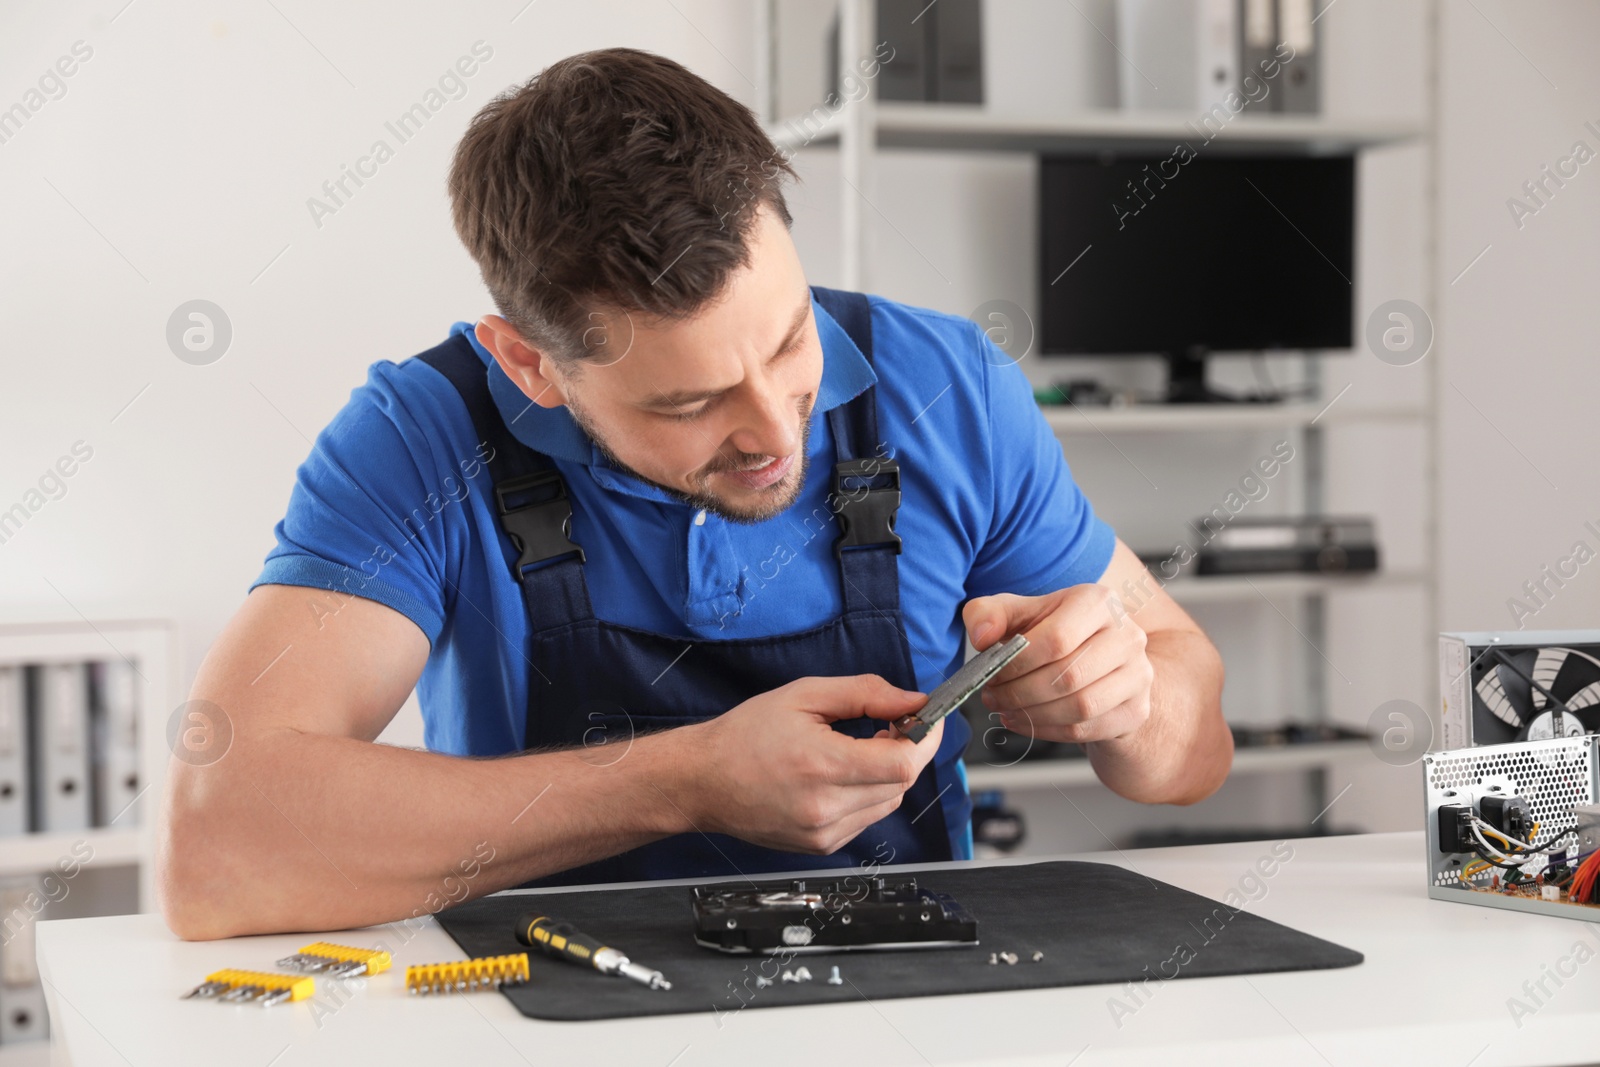 Photo of Male technician repairing hard drive at table indoors